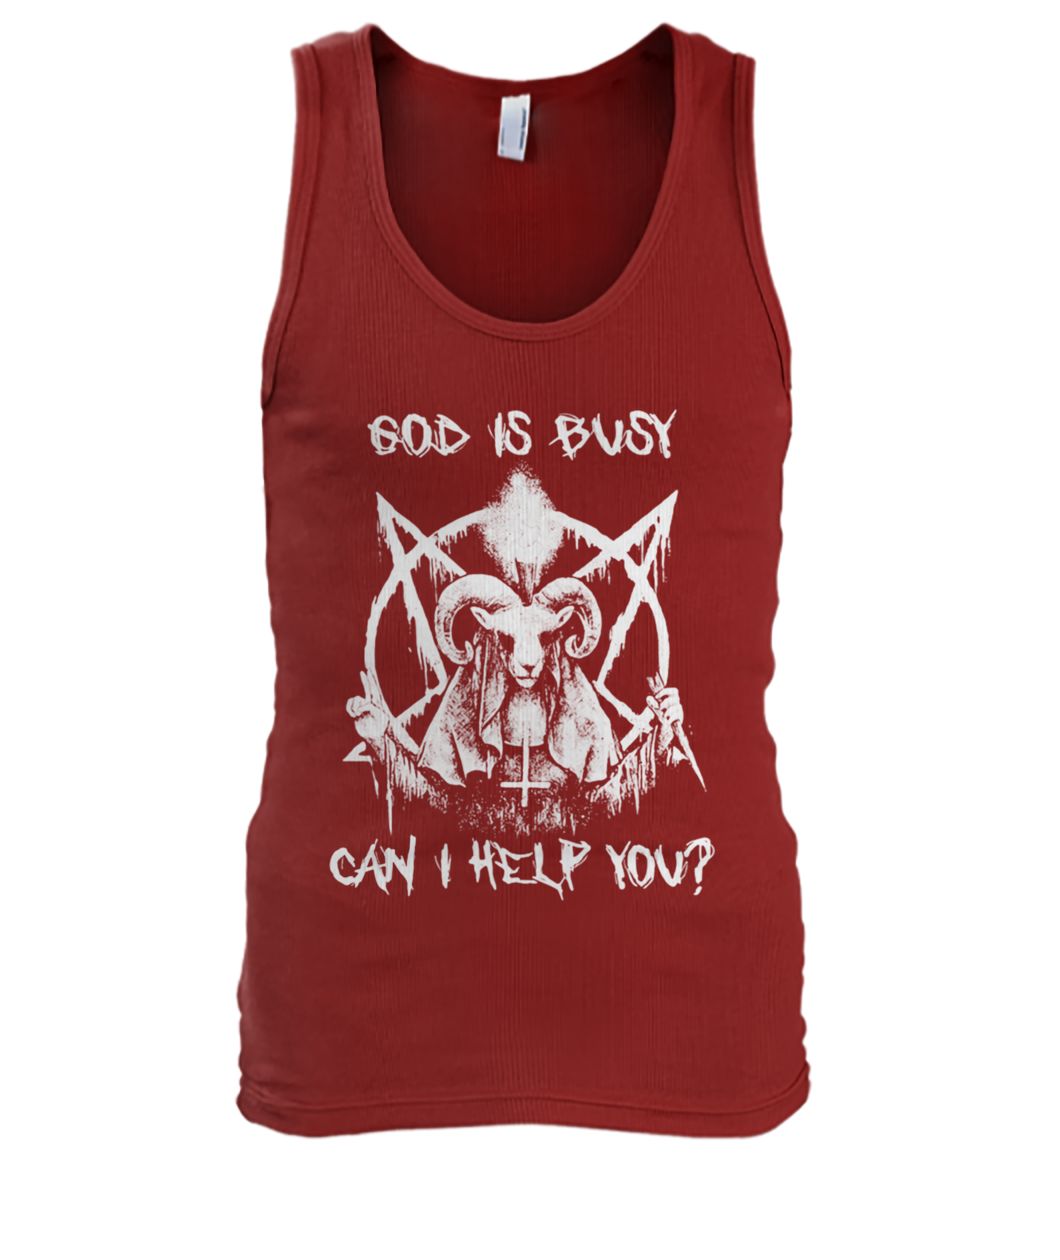 Satan God is busy can I help you men's tank top